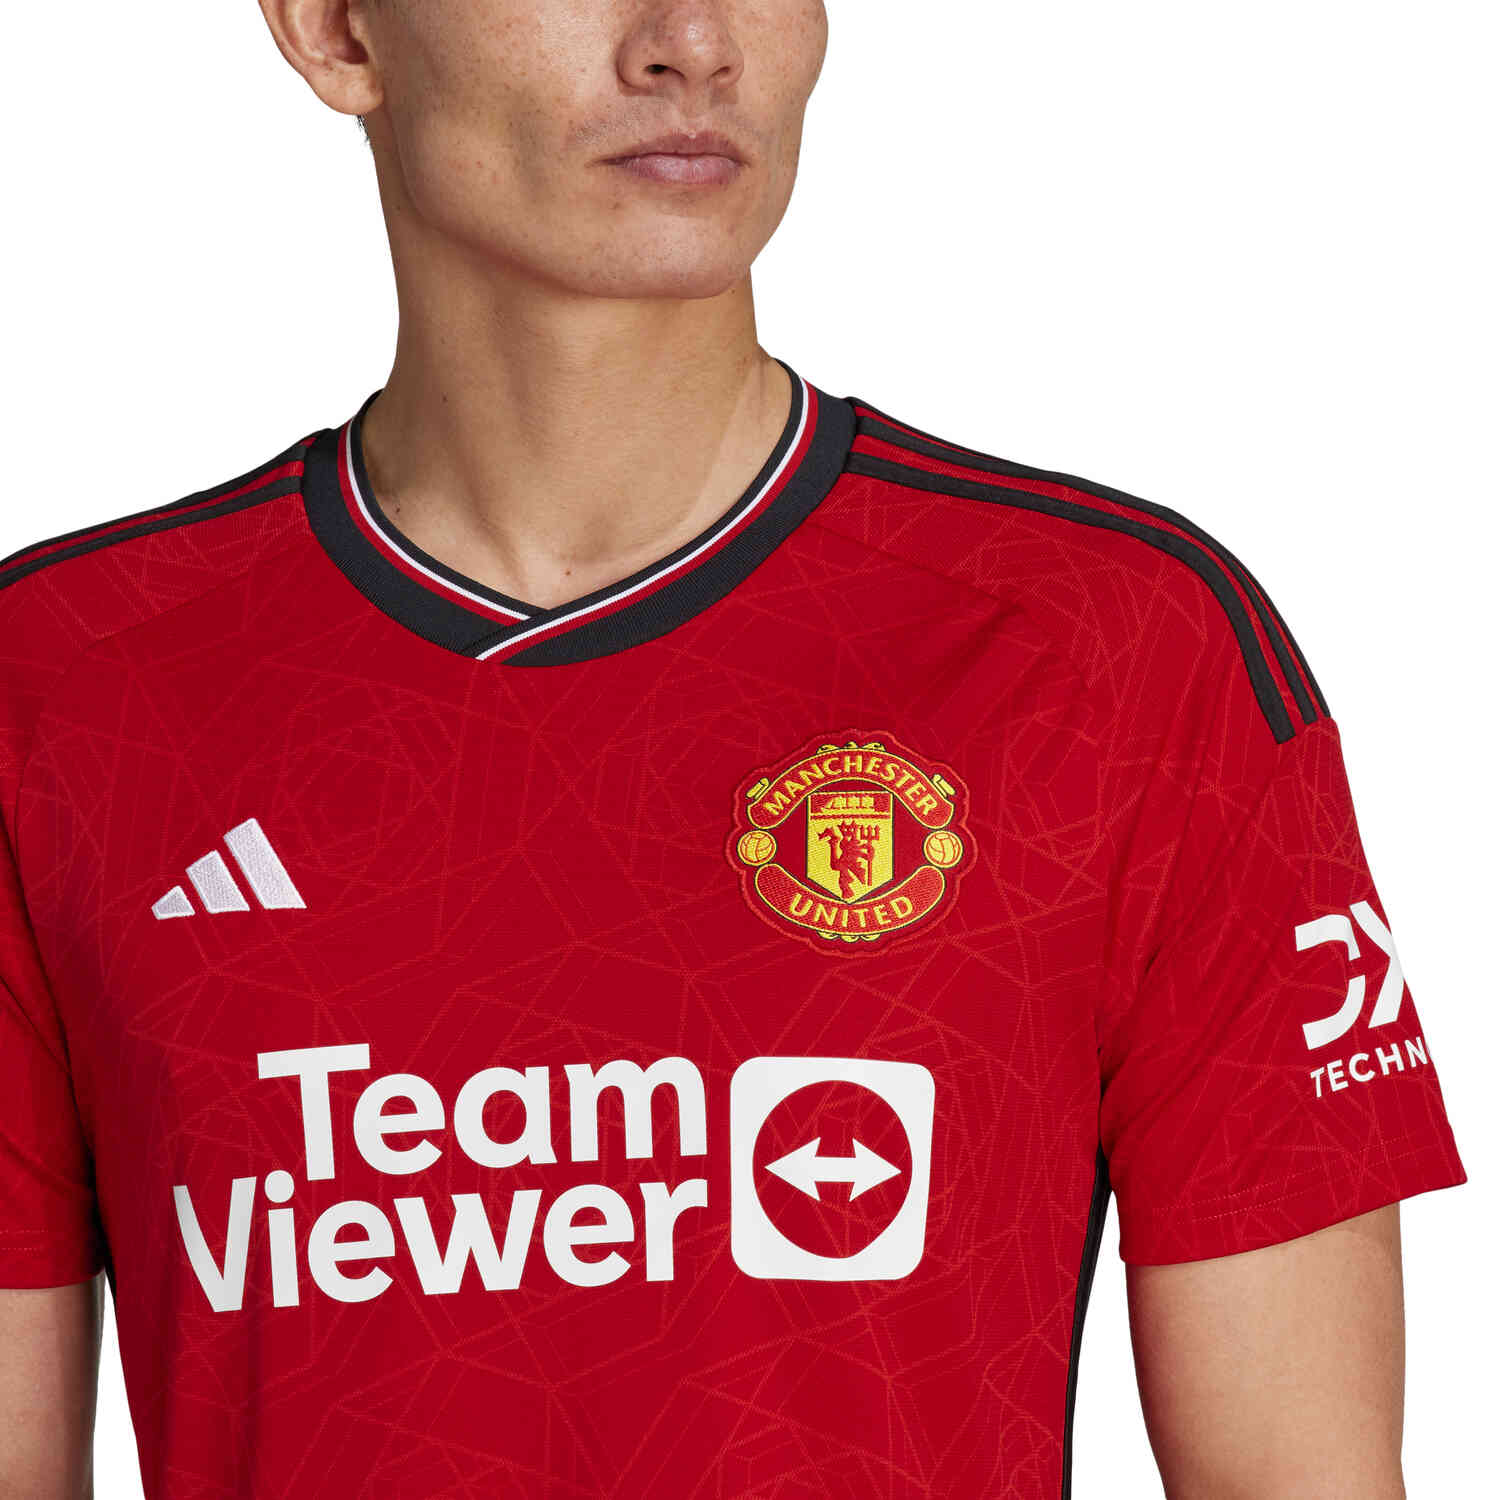 adidas Manchester United Home Jersey 2018-19 - SoccerPro